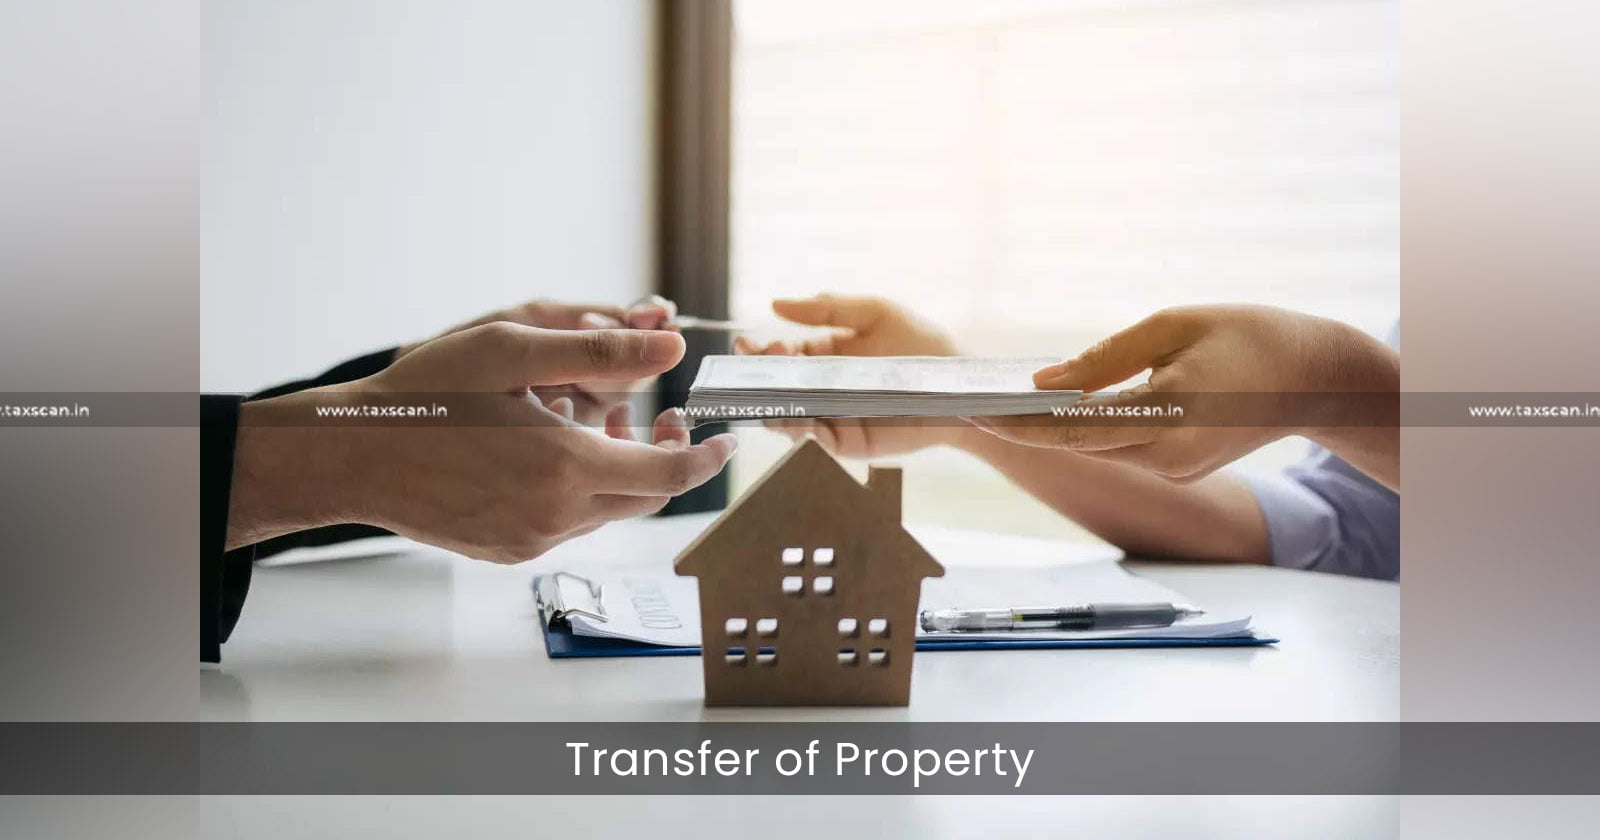 Transfer of Property - Property - Stock-in-Trade - Stock - Trade - ITAT - Taxscan